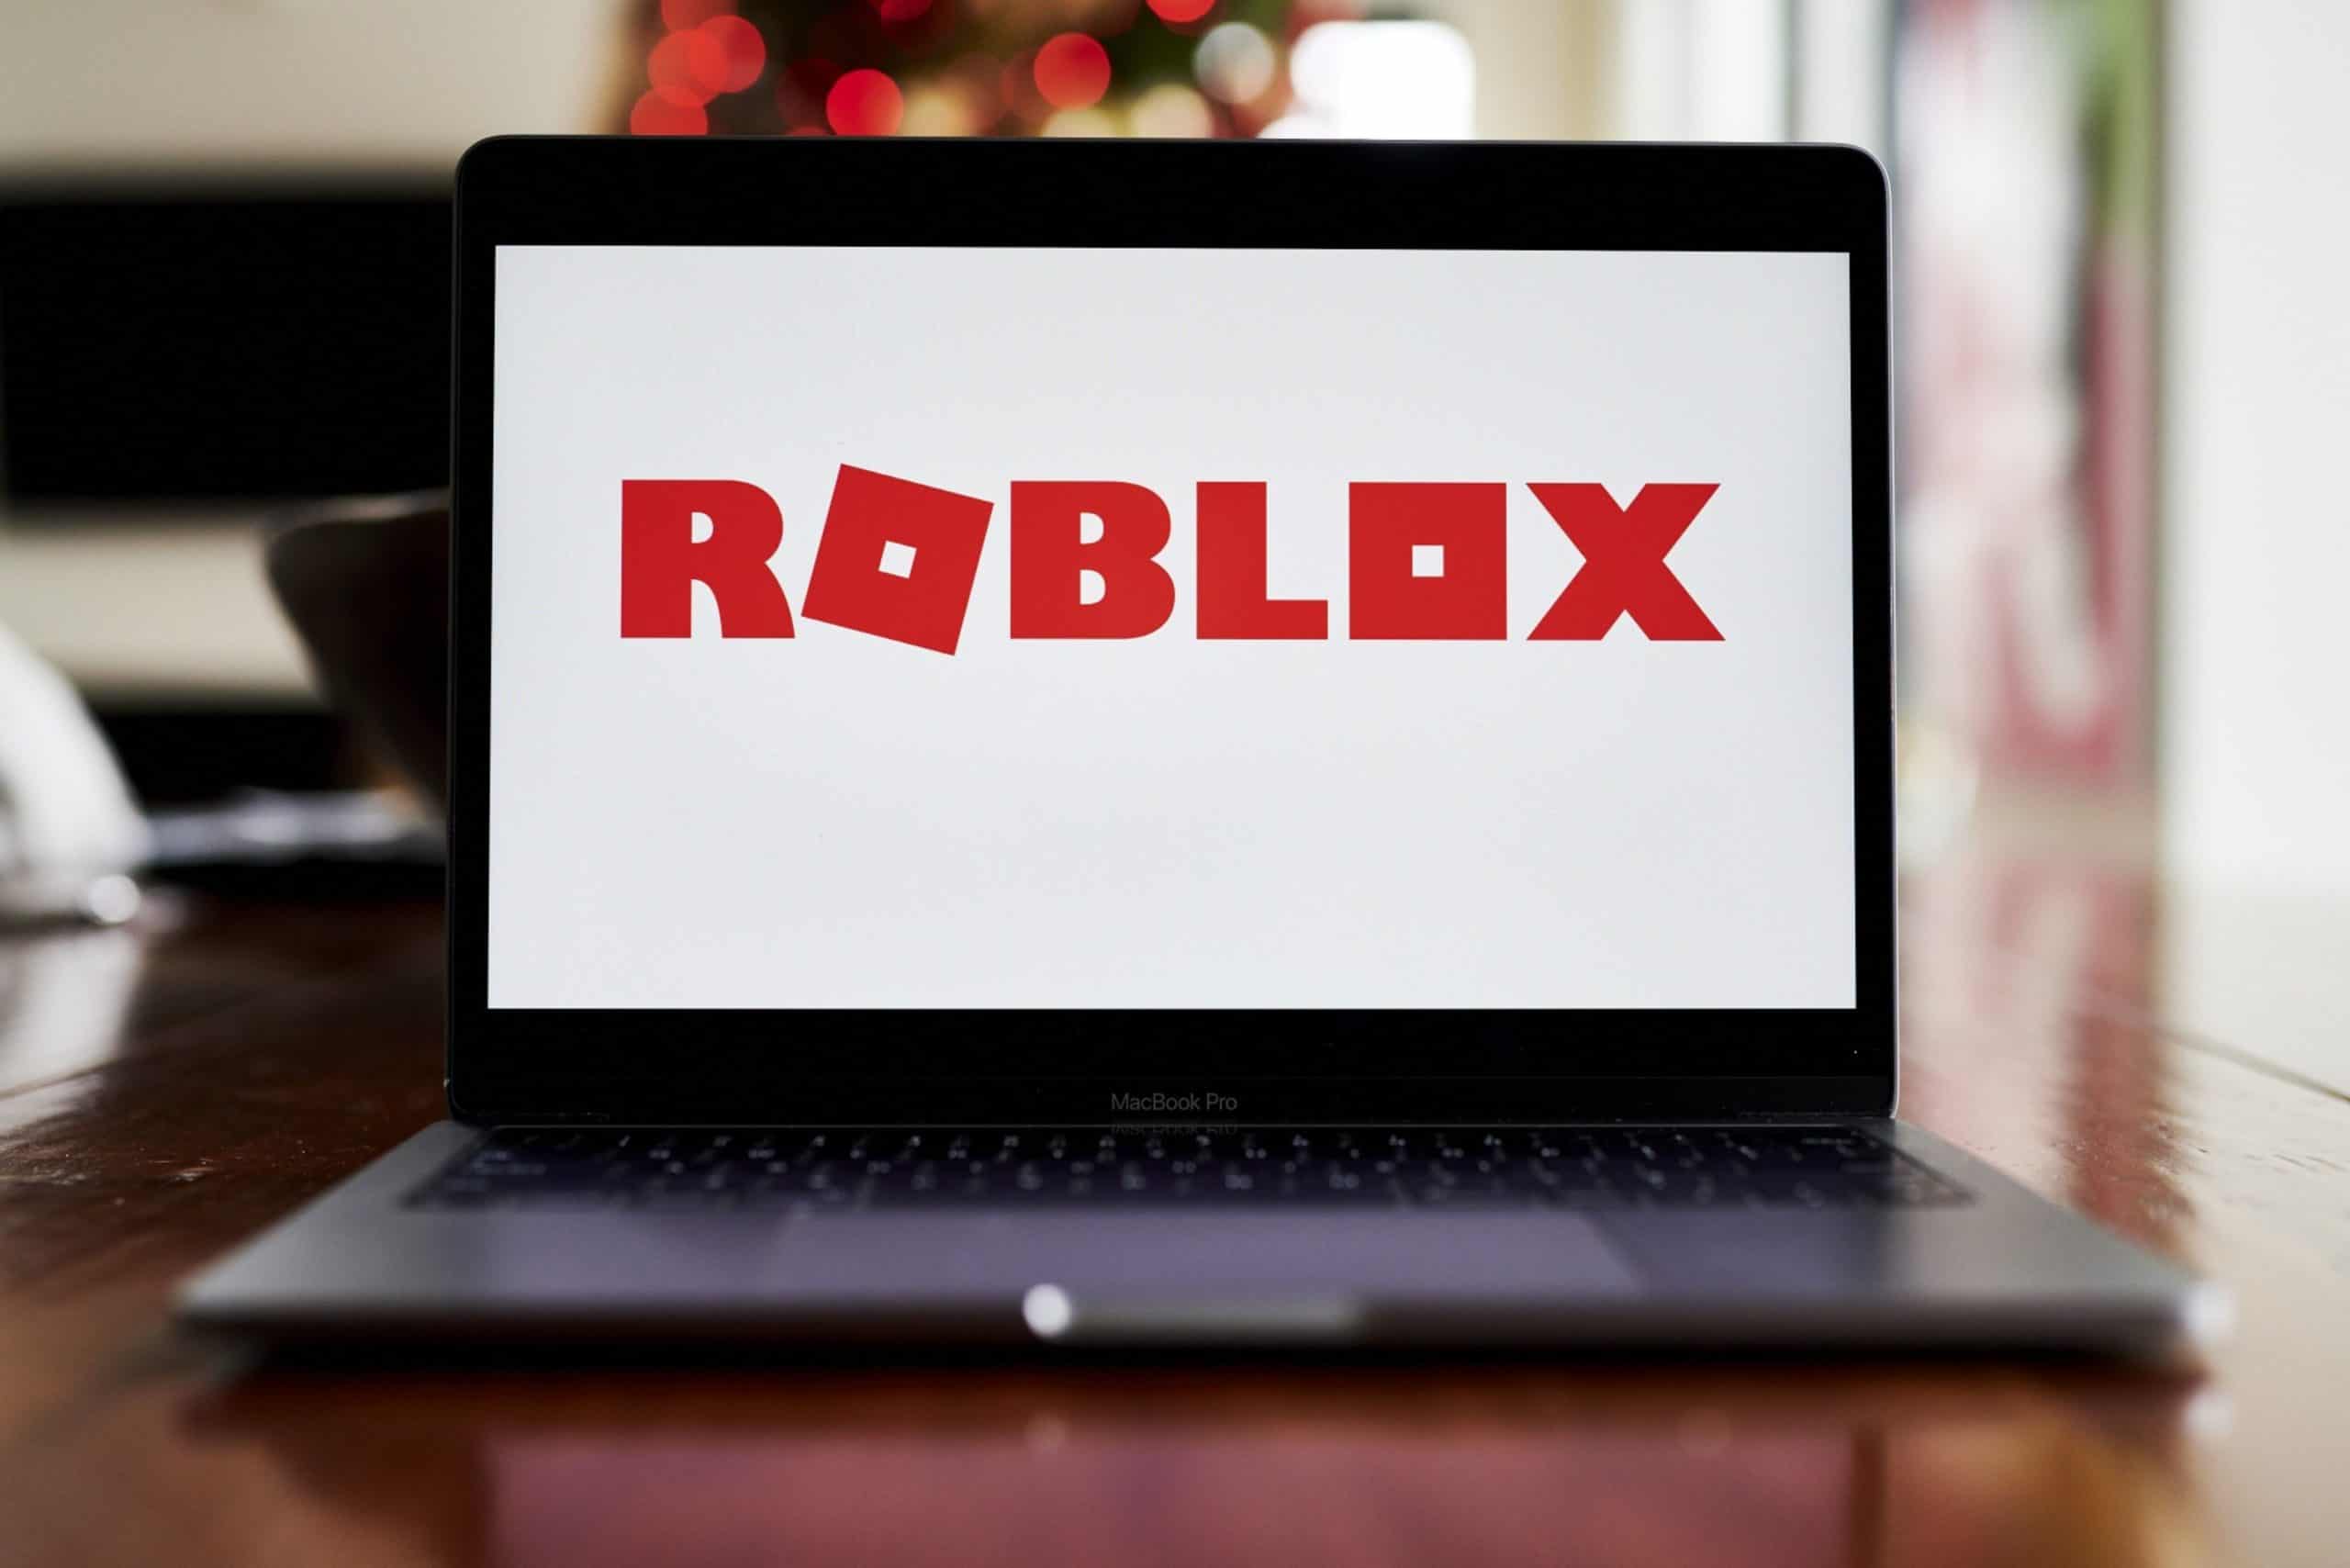 Roblox Switches to Direct Listing From IPO With Investment - Bloomberg